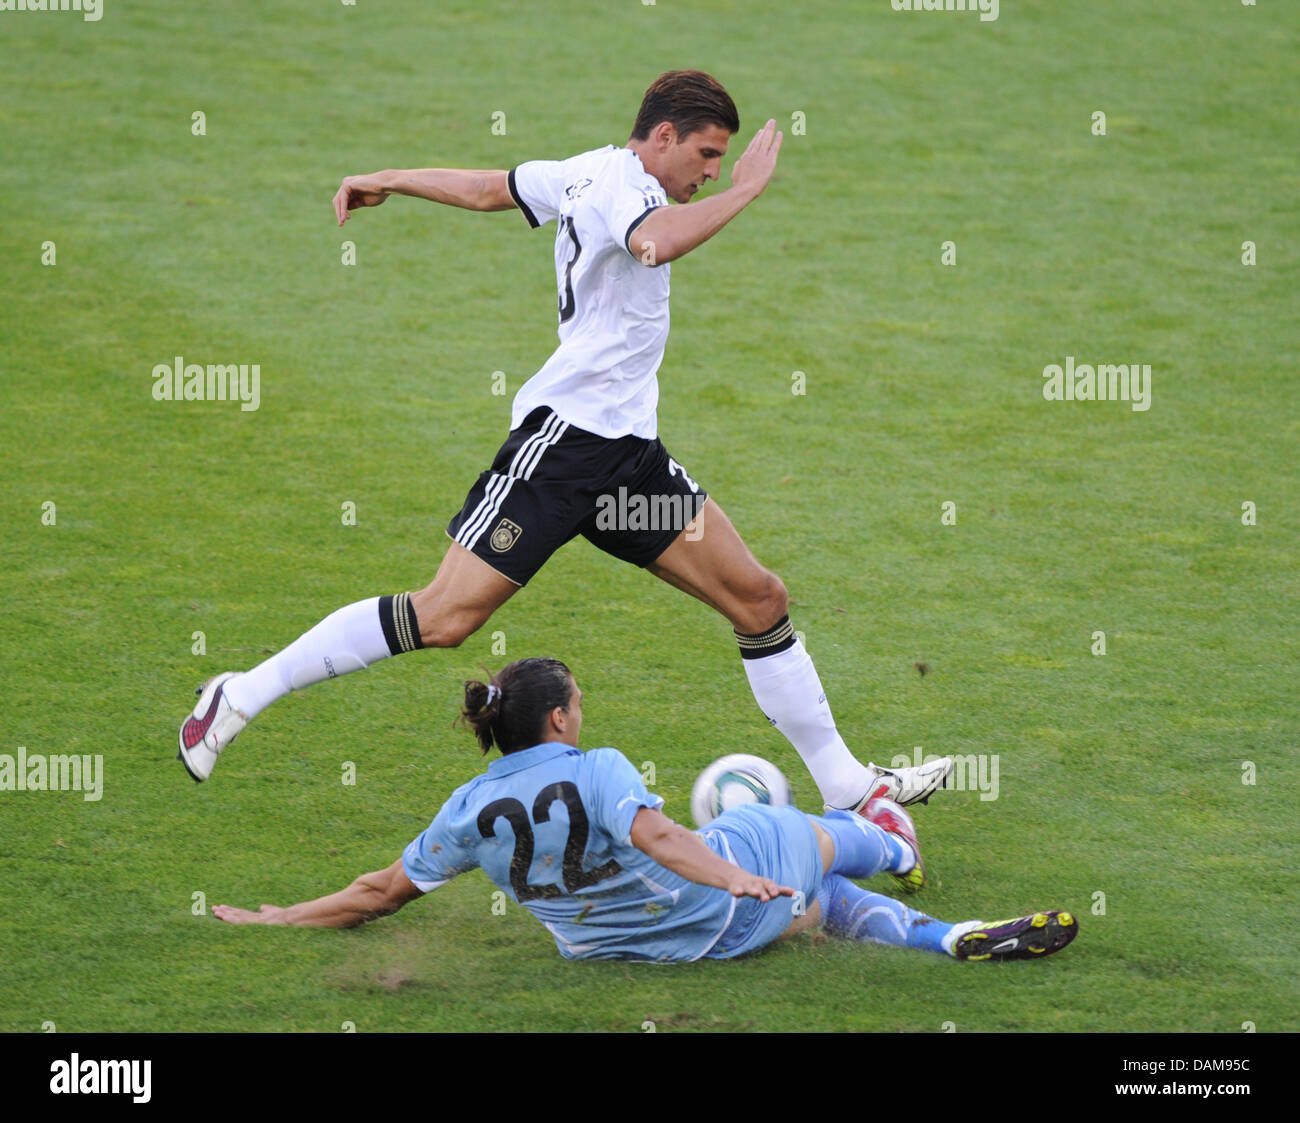 Germany's Mario Gomez (top) and Martin Caceres of Uruguay vie for the ball during soccer friendly Germany vs. Uruguay at Rhein-Neckar-Arena in Sinsheim, Germany, 29 May 2011. Germany won the friendly match 2-1. Photo: Uli Deck Stock Photo